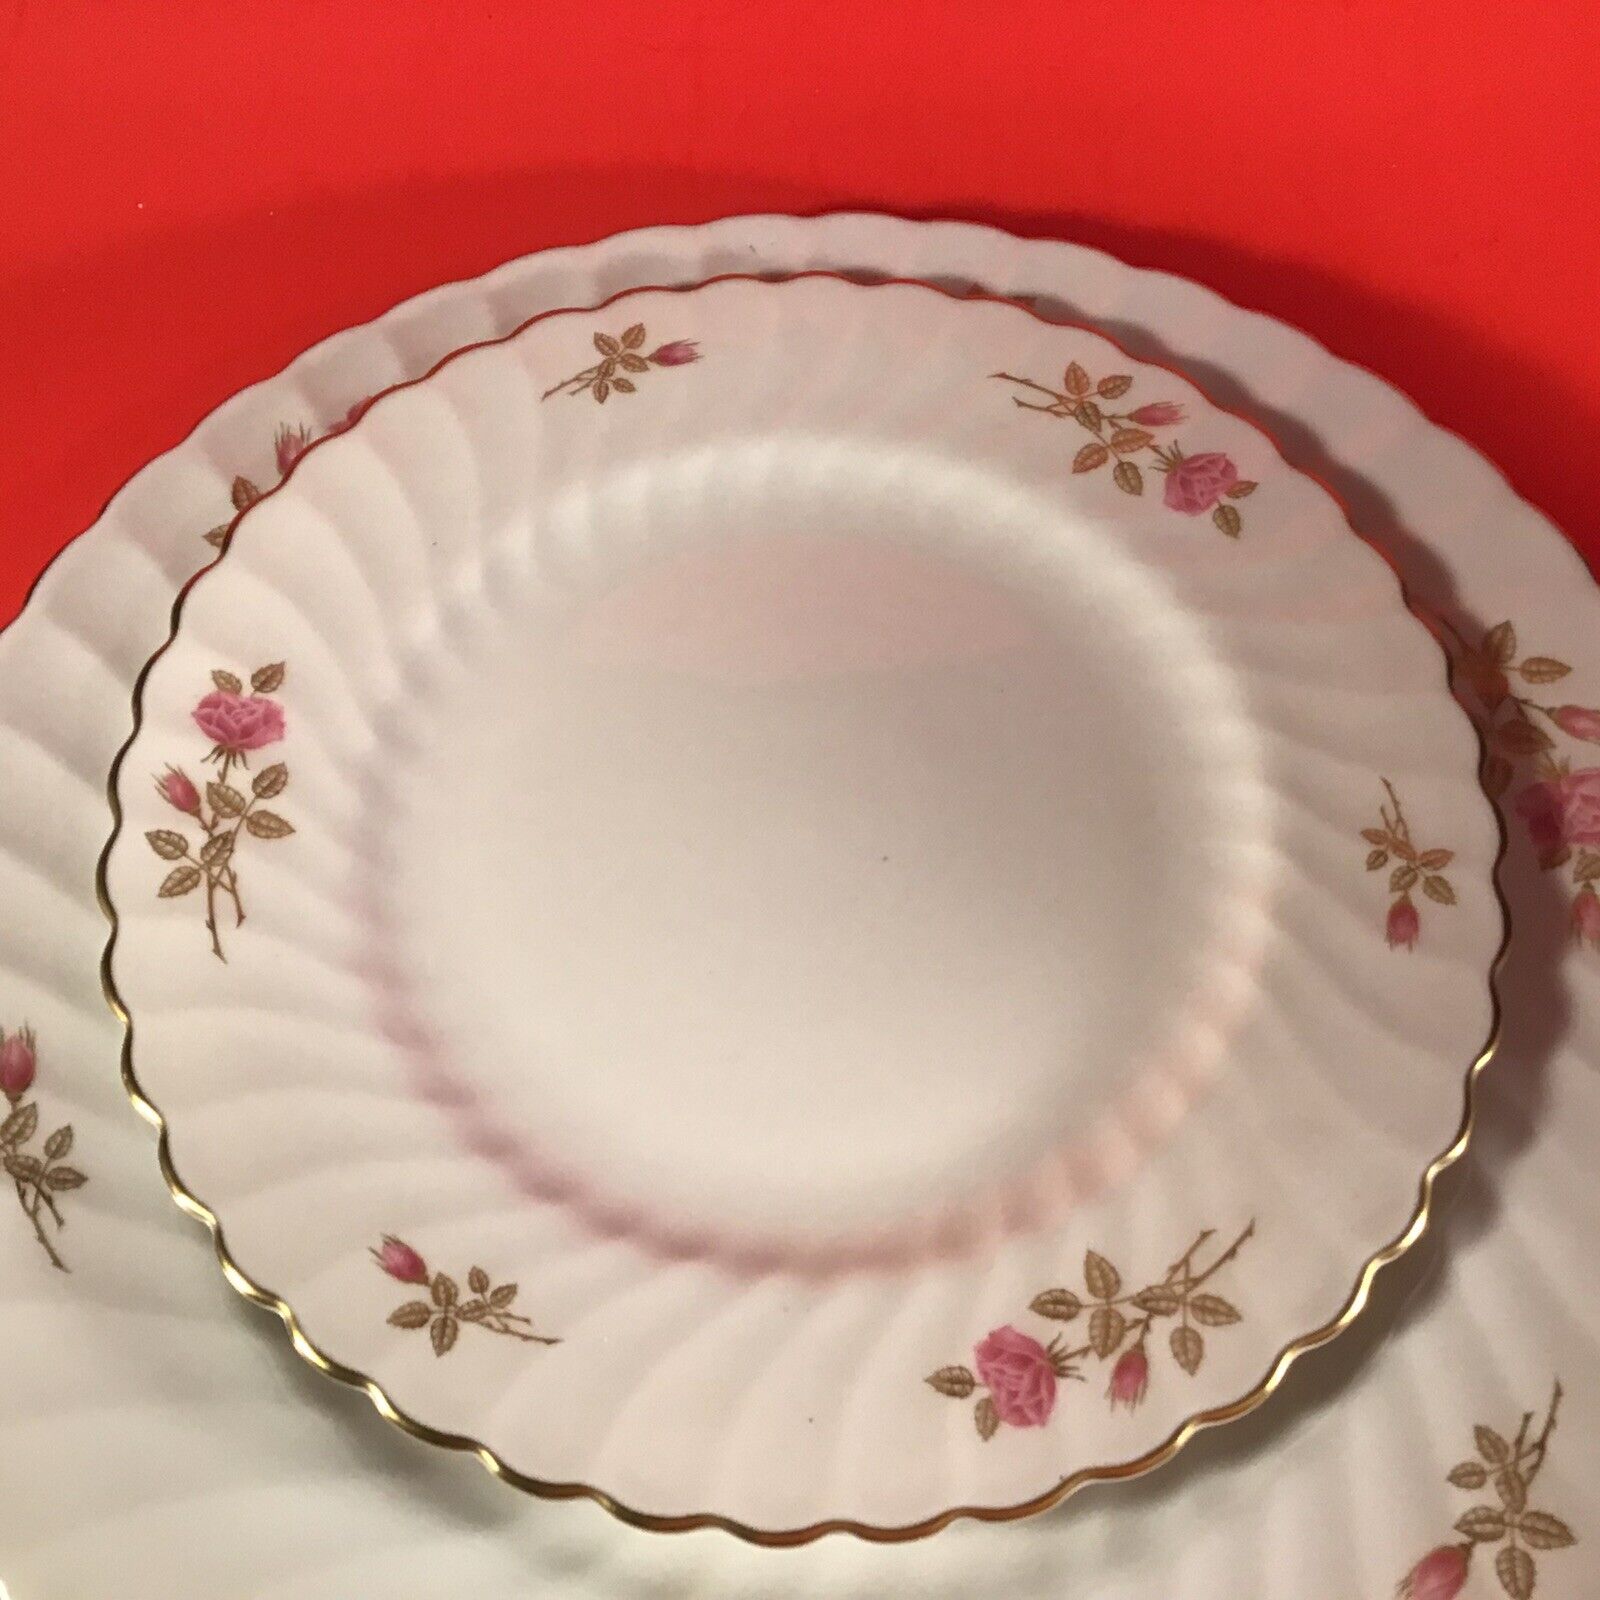 SYRACUSE CHINA COURTSHIP SILHOUETTE 5 PIECE PLACE SETTING PINK AND GOLD FLORAL syracuse china - фотография #6